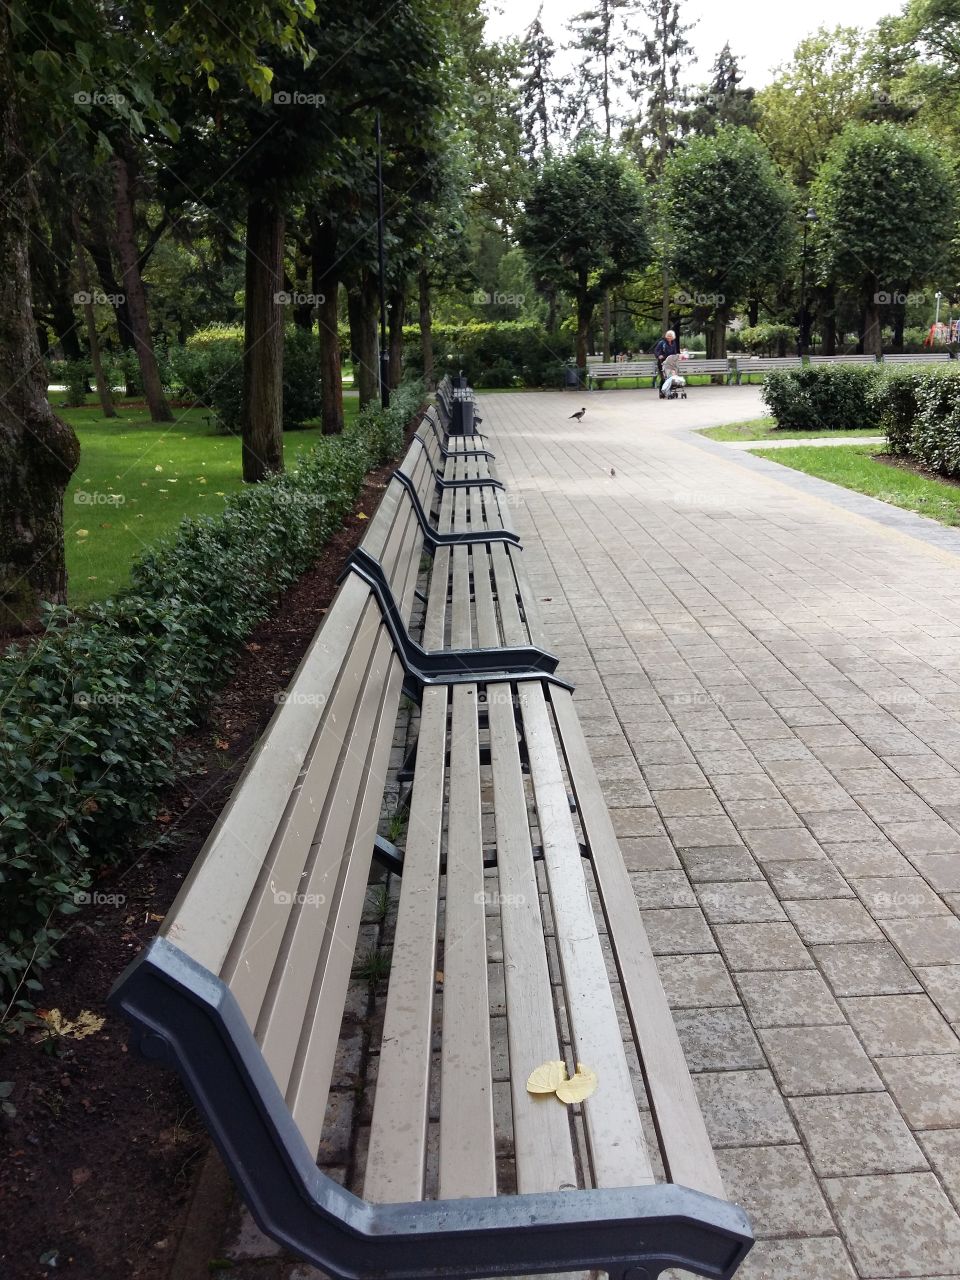 Park view with benches